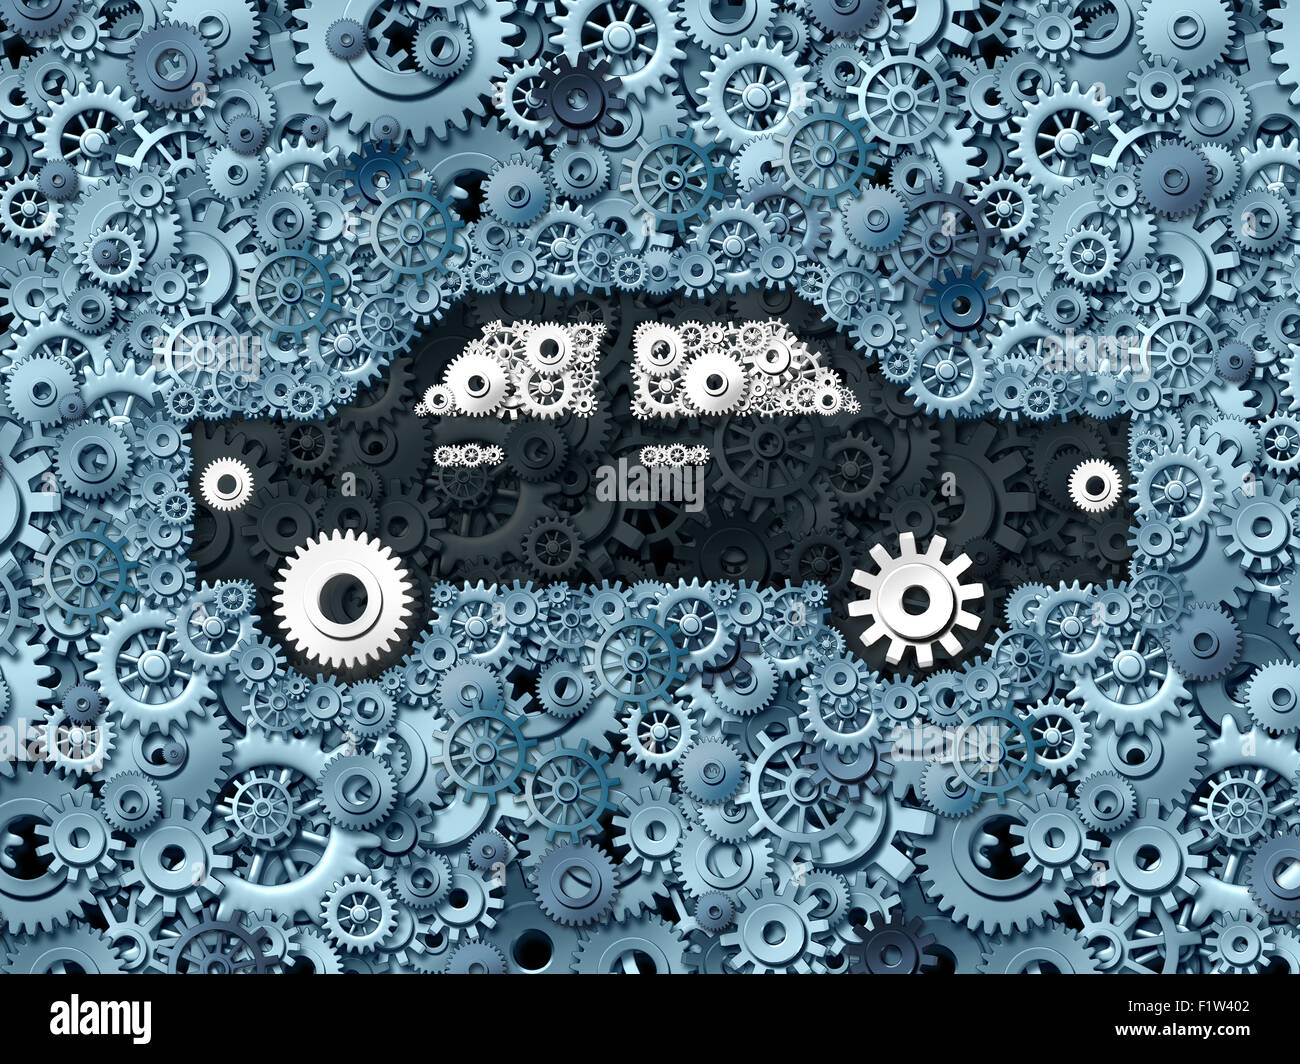 Automobile business and car industry concept as a group of gears shaped as a generic auto as a mechanic symbol or auto insurance industry transportation icon. Stock Photo